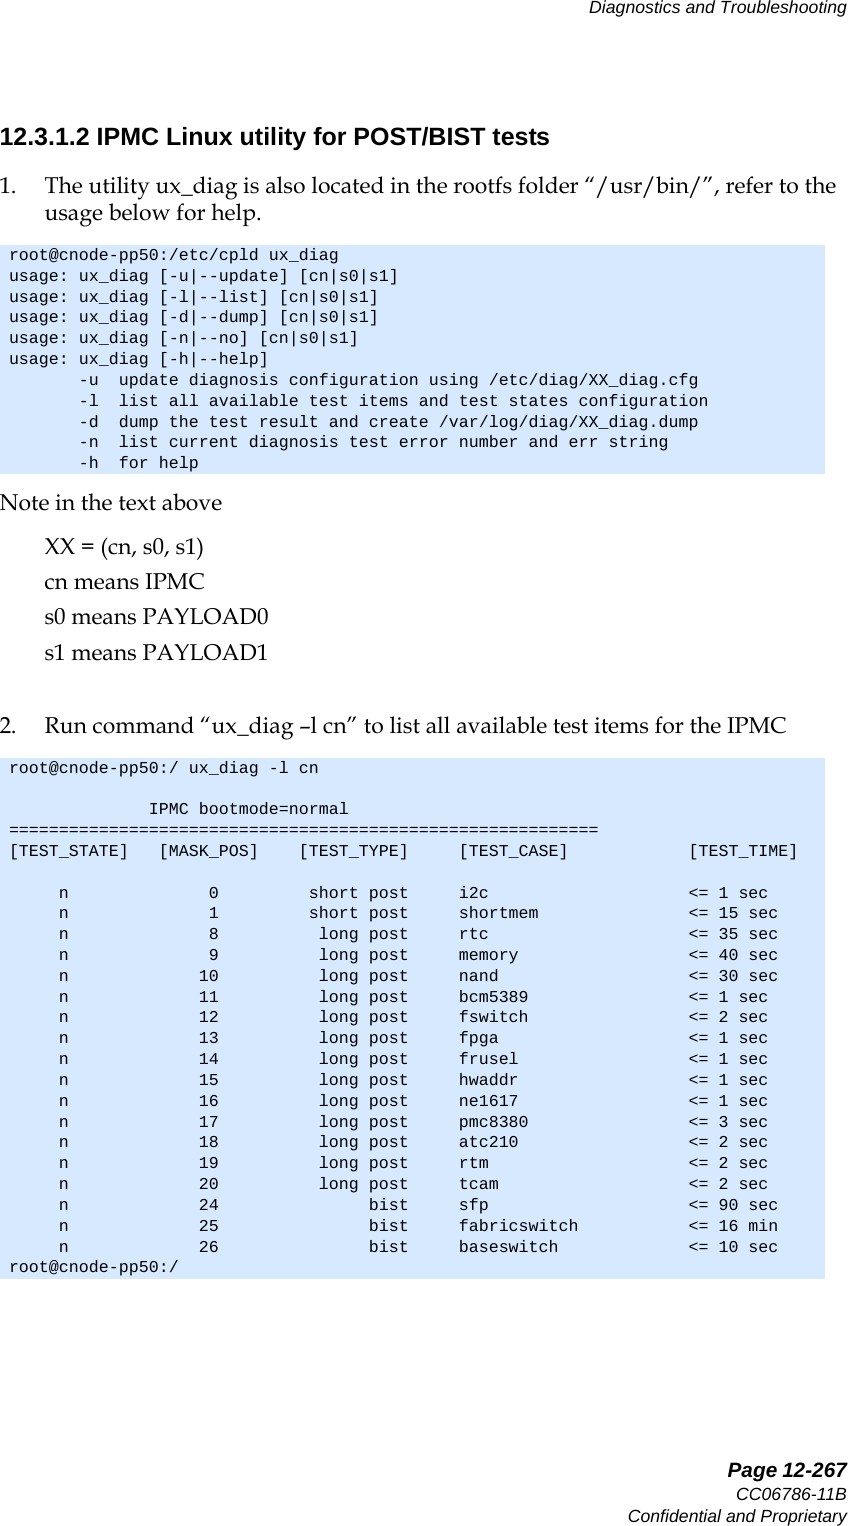   Page 12-267CC06786-11BConfidential and ProprietaryDiagnostics and Troubleshooting14ABABPreliminary12.3.1.2 IPMC Linux utility for POST/BIST tests1. The utility ux_diag is also located in the rootfs folder “/usr/bin/”, refer to the usage below for help.Note in the text above XX = (cn, s0, s1)cn means IPMCs0 means PAYLOAD0s1 means PAYLOAD12. Run command “ux_diag –l cn” to list all available test items for the IPMCroot@cnode-pp50:/etc/cpld ux_diagusage: ux_diag [-u|--update] [cn|s0|s1]usage: ux_diag [-l|--list] [cn|s0|s1]usage: ux_diag [-d|--dump] [cn|s0|s1]usage: ux_diag [-n|--no] [cn|s0|s1]usage: ux_diag [-h|--help]       -u  update diagnosis configuration using /etc/diag/XX_diag.cfg       -l  list all available test items and test states configuration       -d  dump the test result and create /var/log/diag/XX_diag.dump       -n  list current diagnosis test error number and err string       -h  for helproot@cnode-pp50:/ ux_diag -l cn              IPMC bootmode=normal===========================================================[TEST_STATE]   [MASK_POS]    [TEST_TYPE]     [TEST_CASE]            [TEST_TIME]     n              0         short post     i2c                    &lt;= 1 sec     n              1         short post     shortmem               &lt;= 15 sec     n              8          long post     rtc                    &lt;= 35 sec     n              9          long post     memory                 &lt;= 40 sec     n             10          long post     nand                   &lt;= 30 sec     n             11          long post     bcm5389                &lt;= 1 sec     n             12          long post     fswitch                &lt;= 2 sec     n             13          long post     fpga                   &lt;= 1 sec     n             14          long post     frusel                 &lt;= 1 sec     n             15          long post     hwaddr                 &lt;= 1 sec     n             16          long post     ne1617                 &lt;= 1 sec     n             17          long post     pmc8380                &lt;= 3 sec     n             18          long post     atc210                 &lt;= 2 sec     n             19          long post     rtm                    &lt;= 2 sec     n             20          long post     tcam                   &lt;= 2 sec     n             24               bist     sfp                    &lt;= 90 sec     n             25               bist     fabricswitch           &lt;= 16 min     n             26               bist     baseswitch             &lt;= 10 secroot@cnode-pp50:/